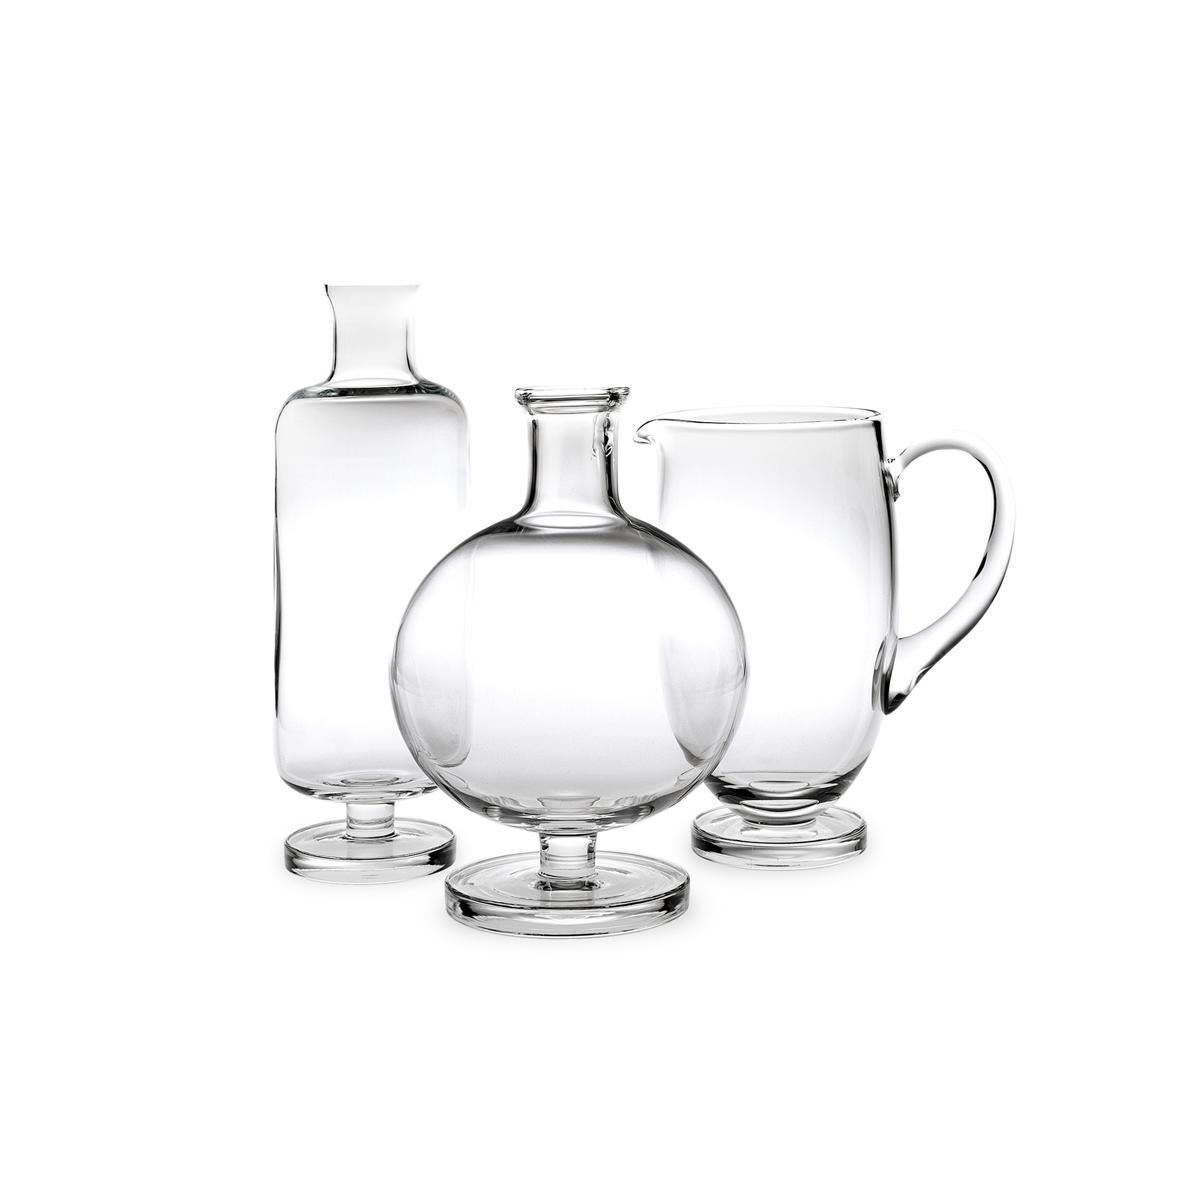 Decanter made in blown in a mold glass. The Tulip collection is a glassware family by Aldo Cibic, who designed these pieces walking the line between classical and Postmodern design. The boldly simple geometric forms of this carafe are at once